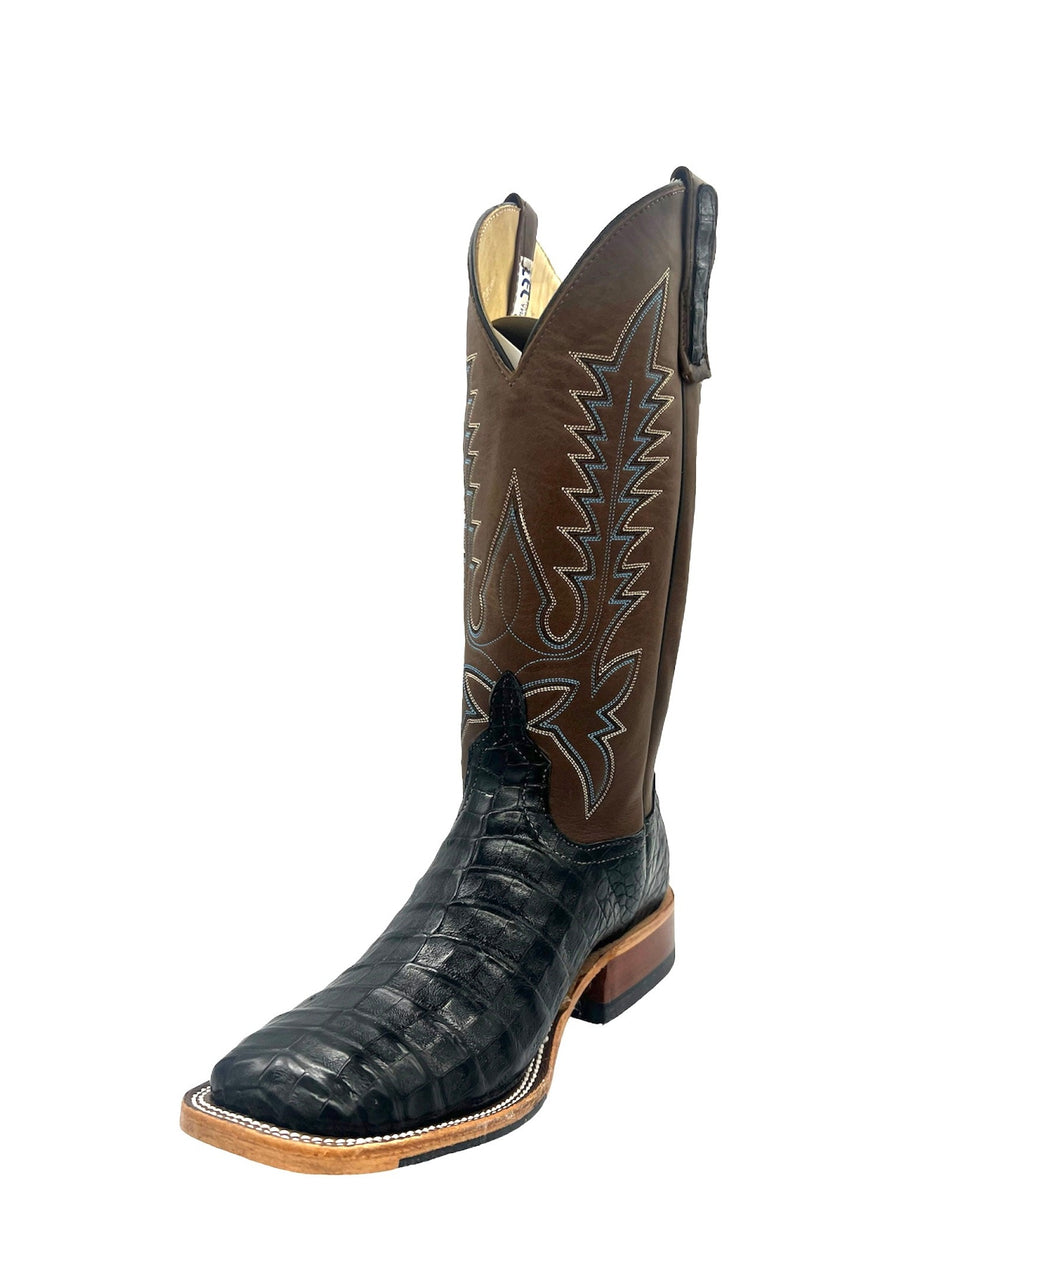 Anderson Bean Exclusive Caiman Belly Avatar Top Men's Boot